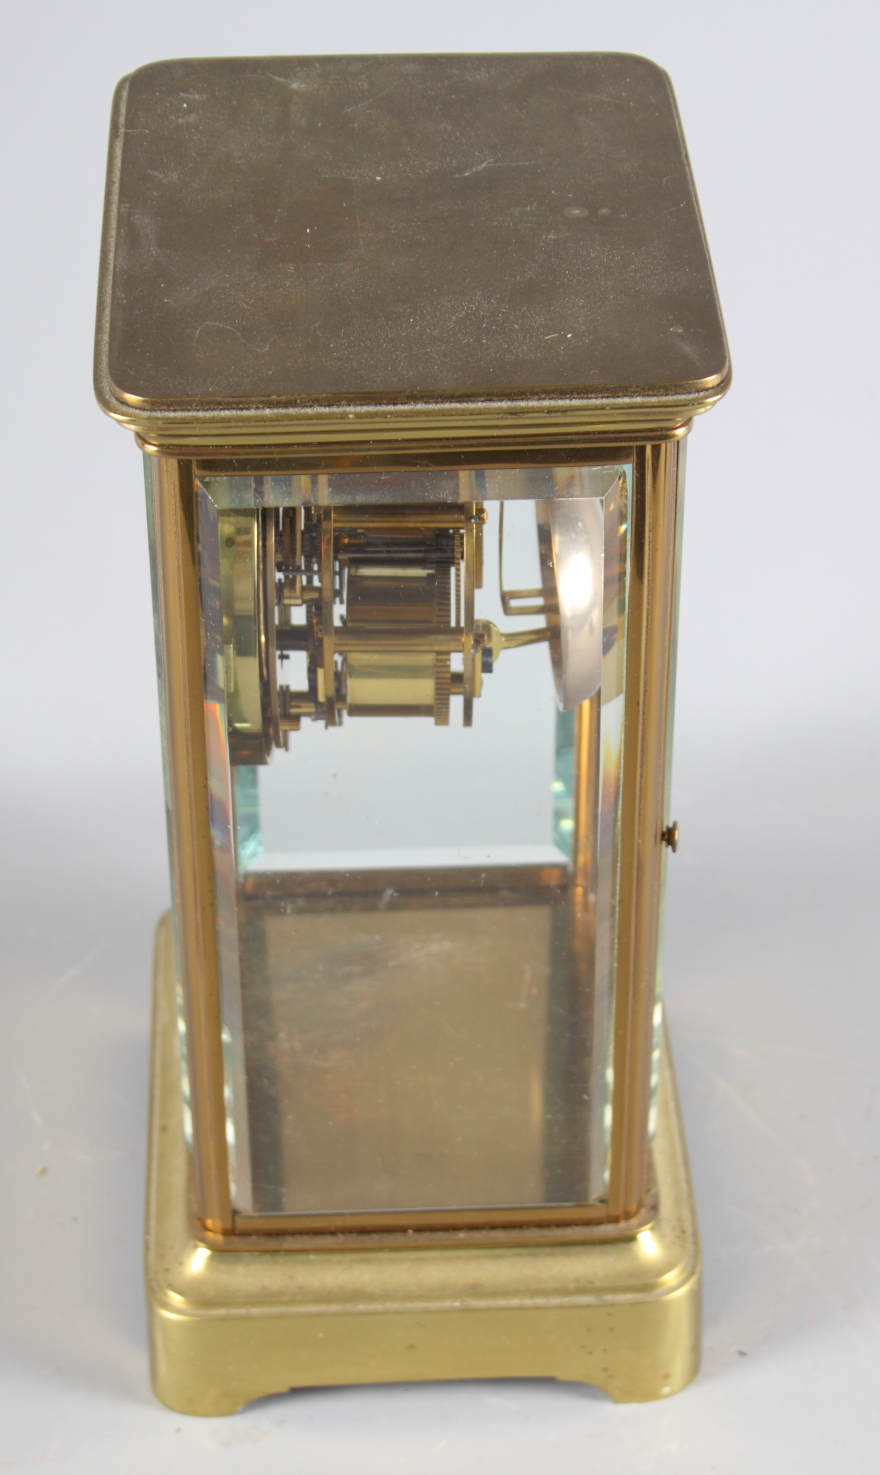 A 19th Century brass cased four-glass clock with white enamel dial and striking movement, 10 1/2" - Image 2 of 8